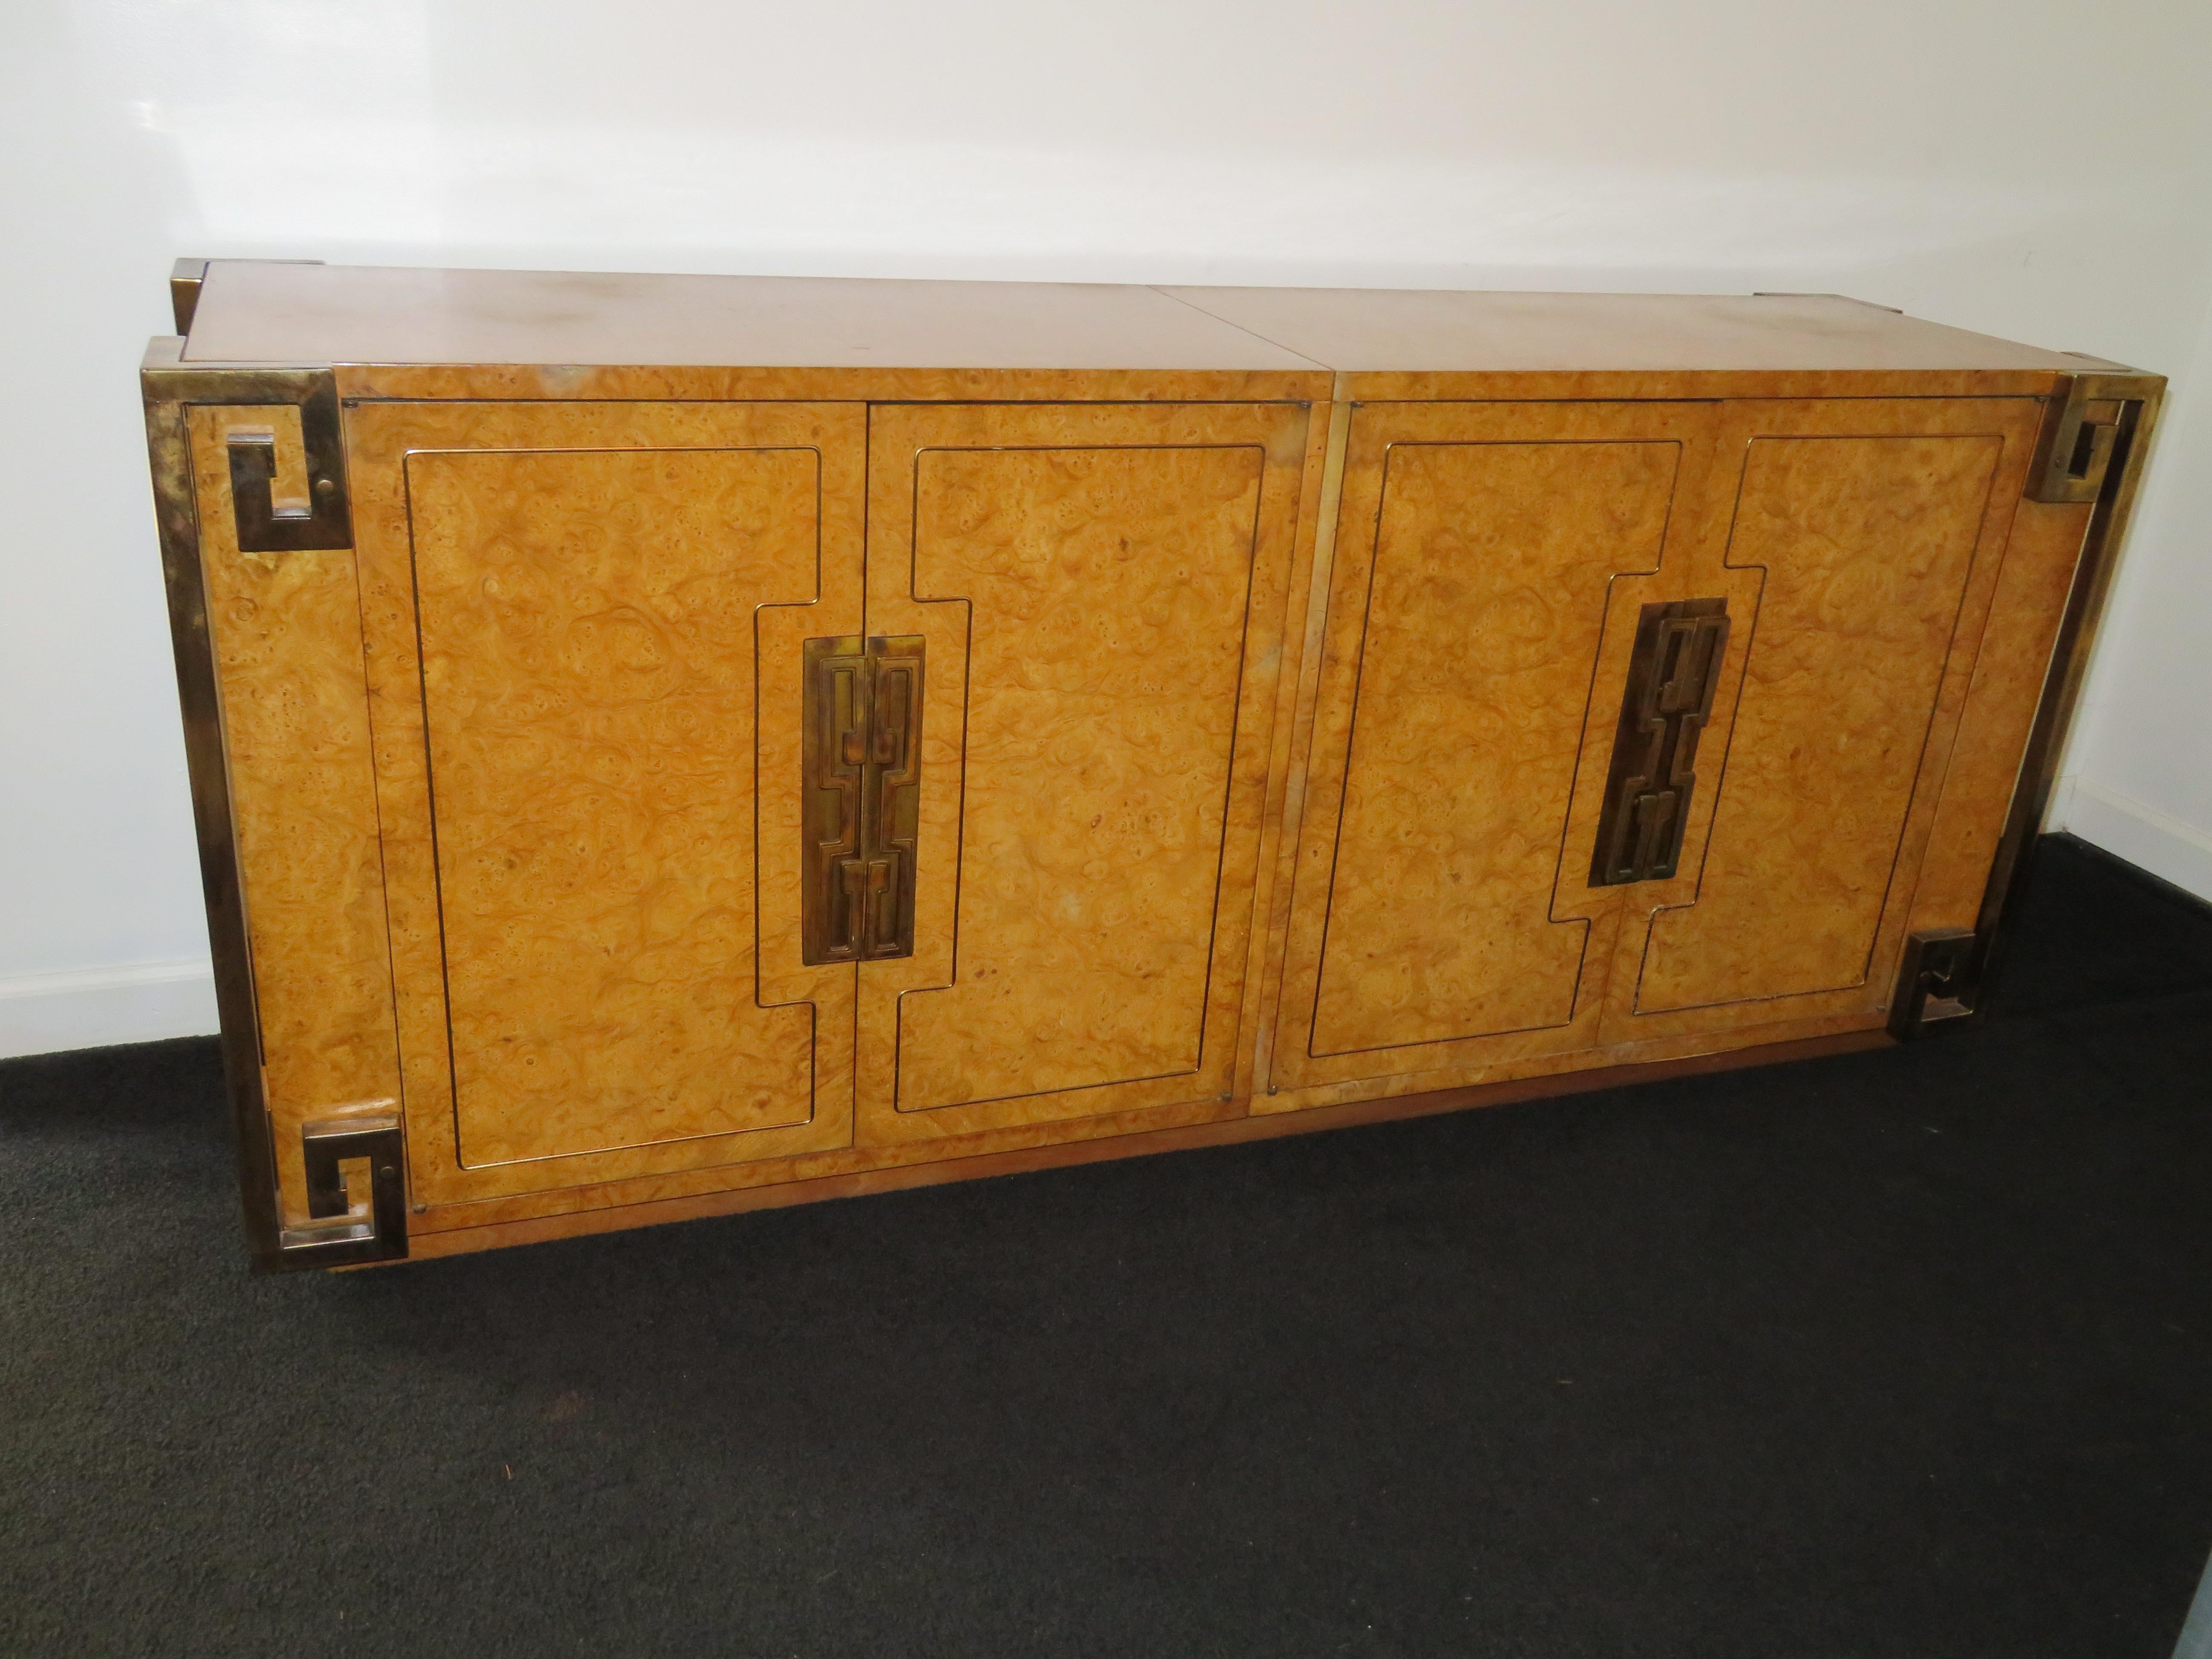 Stunning Mastercraft amboyna burl and brass Greek key credenza buffet. This is one of those pieces that actually takes your breath away when you see it! Gorgeous from every angle and in wonderful vintage condition! A Berhard Rohne masterwork for